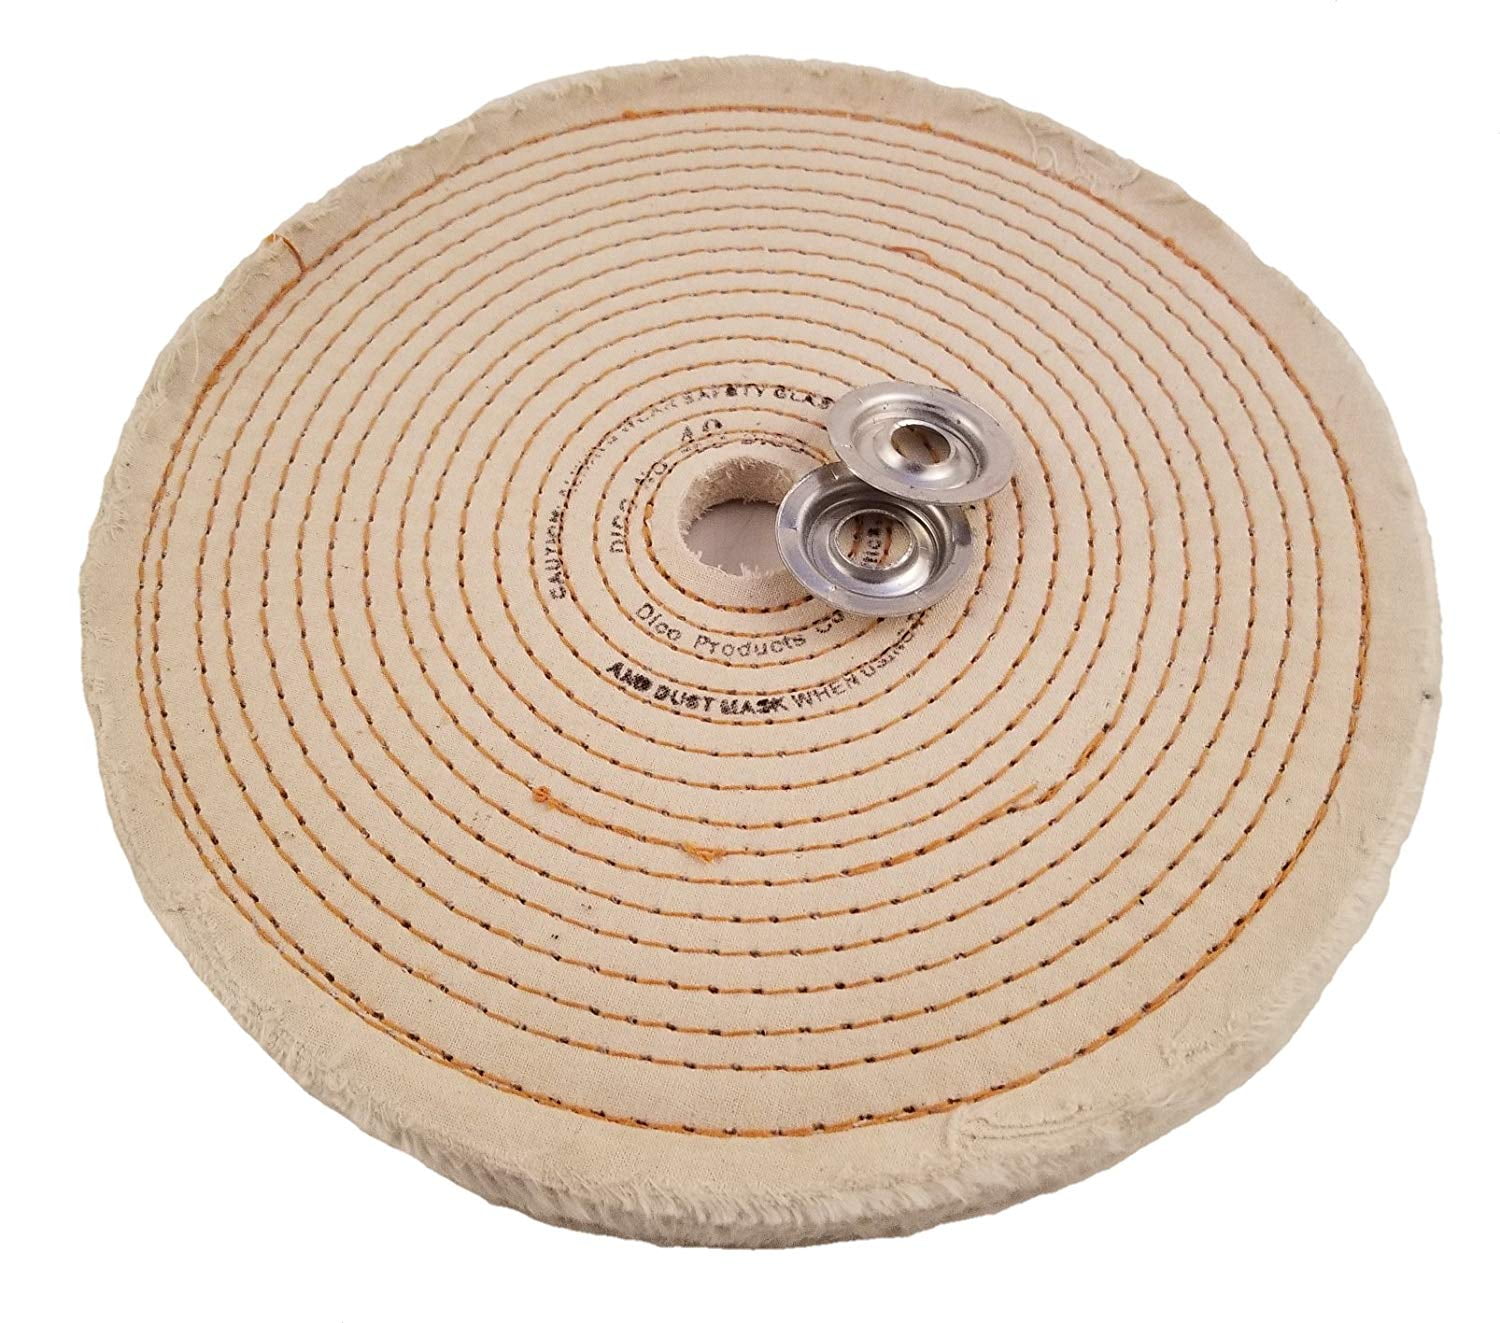 Dico 527-40-6 1/4-Inch Spiral Sewn 6-Inch Diameter 1/2-Inch Thick Buffing Wheel 